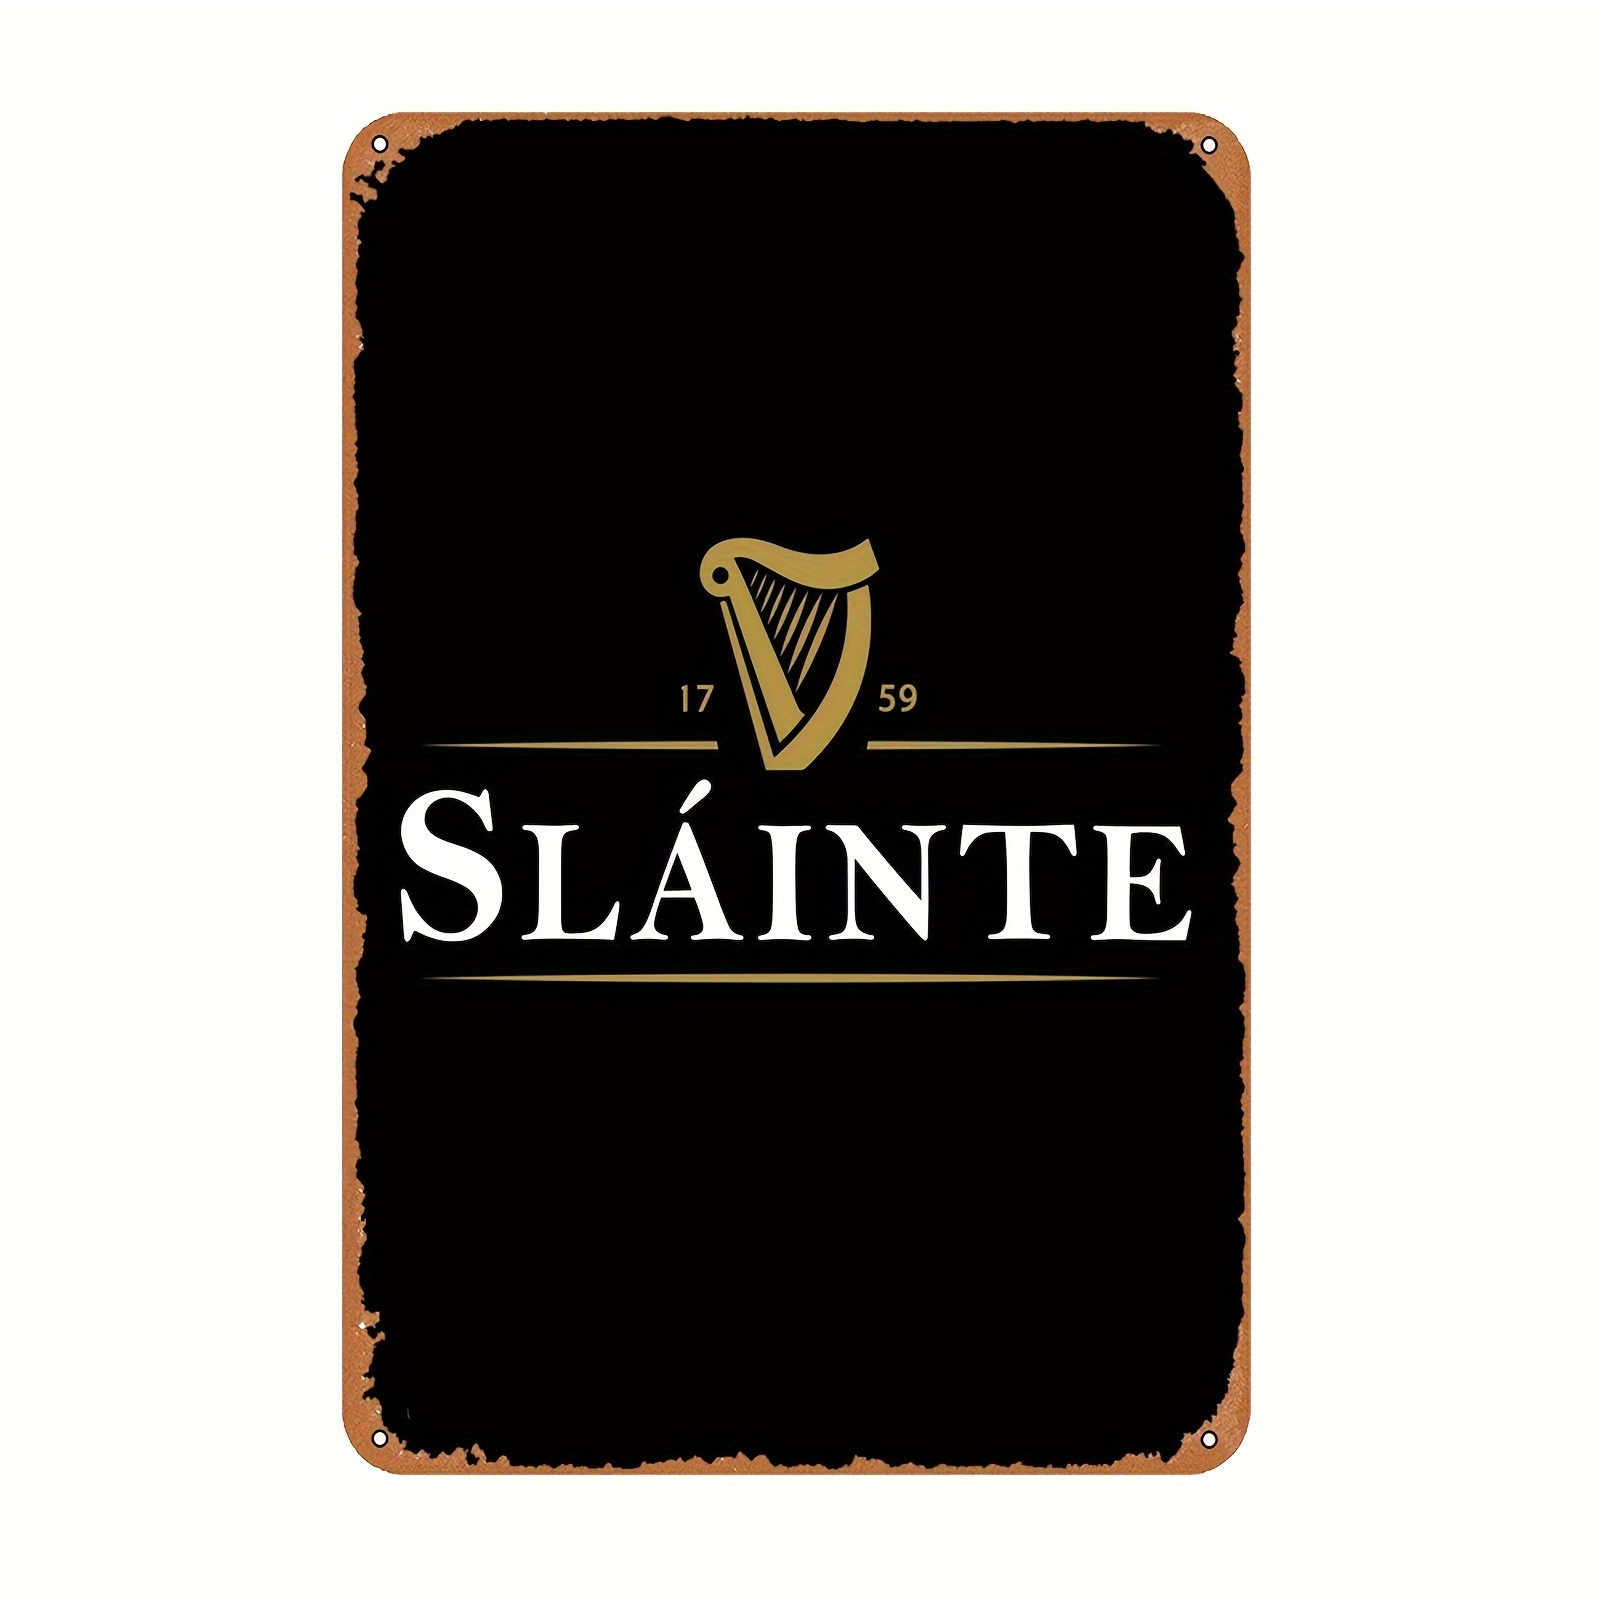 

Slainte Guinness Vintage Metal Sign - Retro Wall Art For Home, Kitchen, Bar, Or Coffee Shop Decor, 12x8 Inch